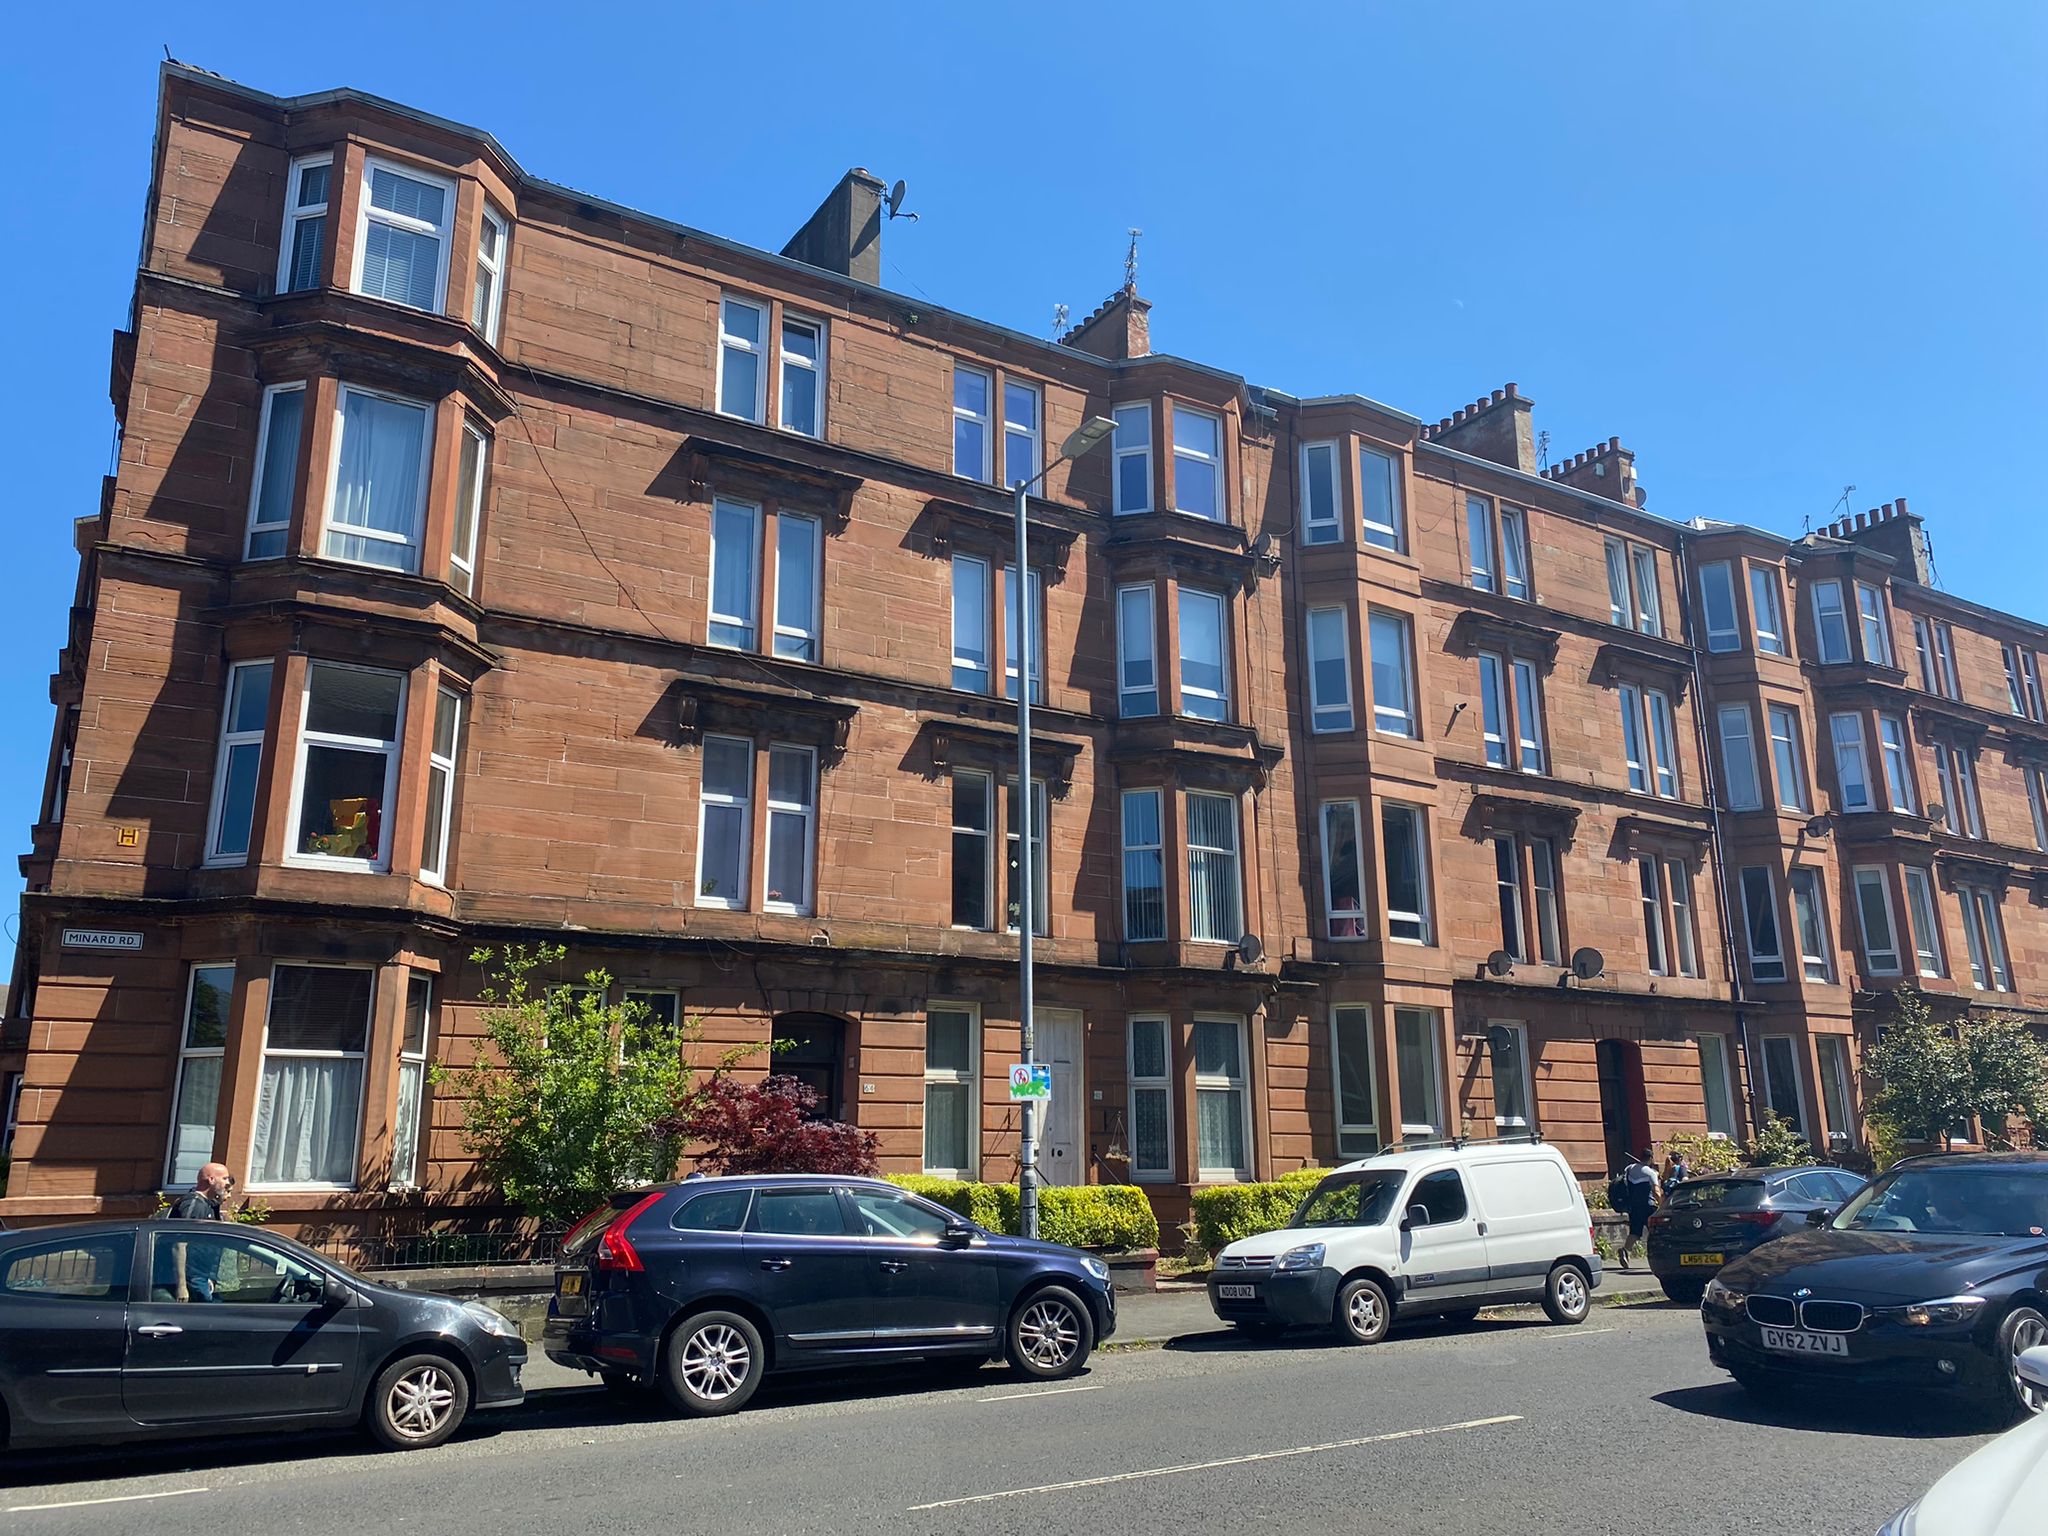 Grants helping to fund improvements to private homes in Glasgow